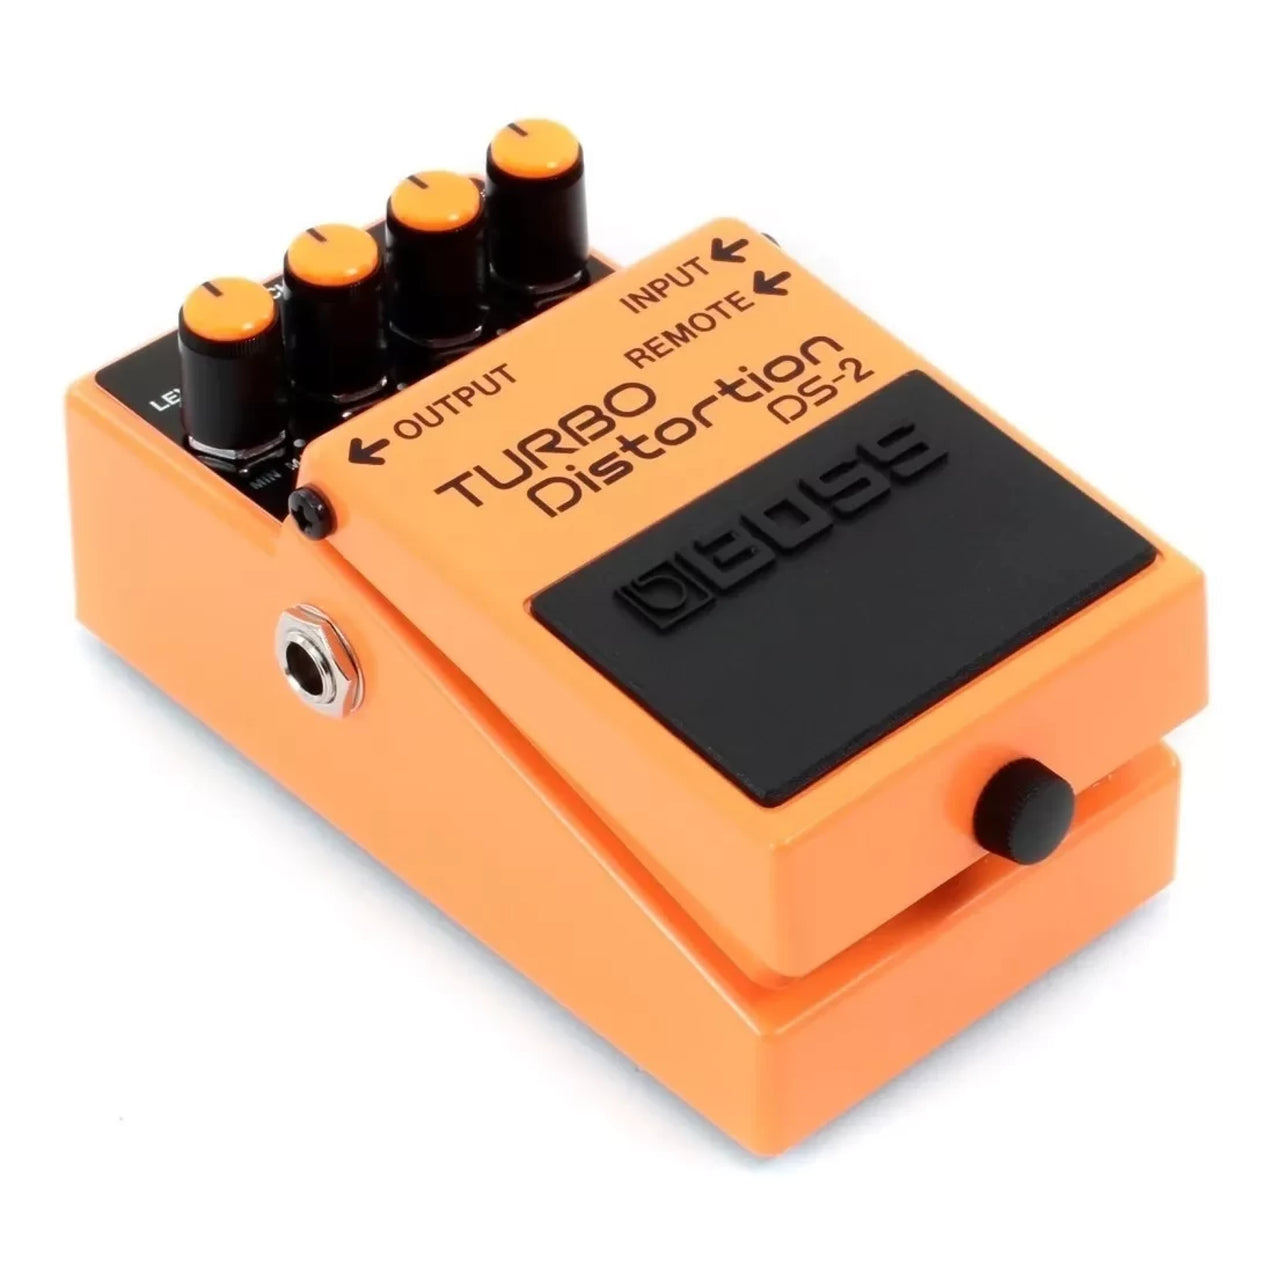 Pedal Efecto Boss Turbodistortion, Ds2